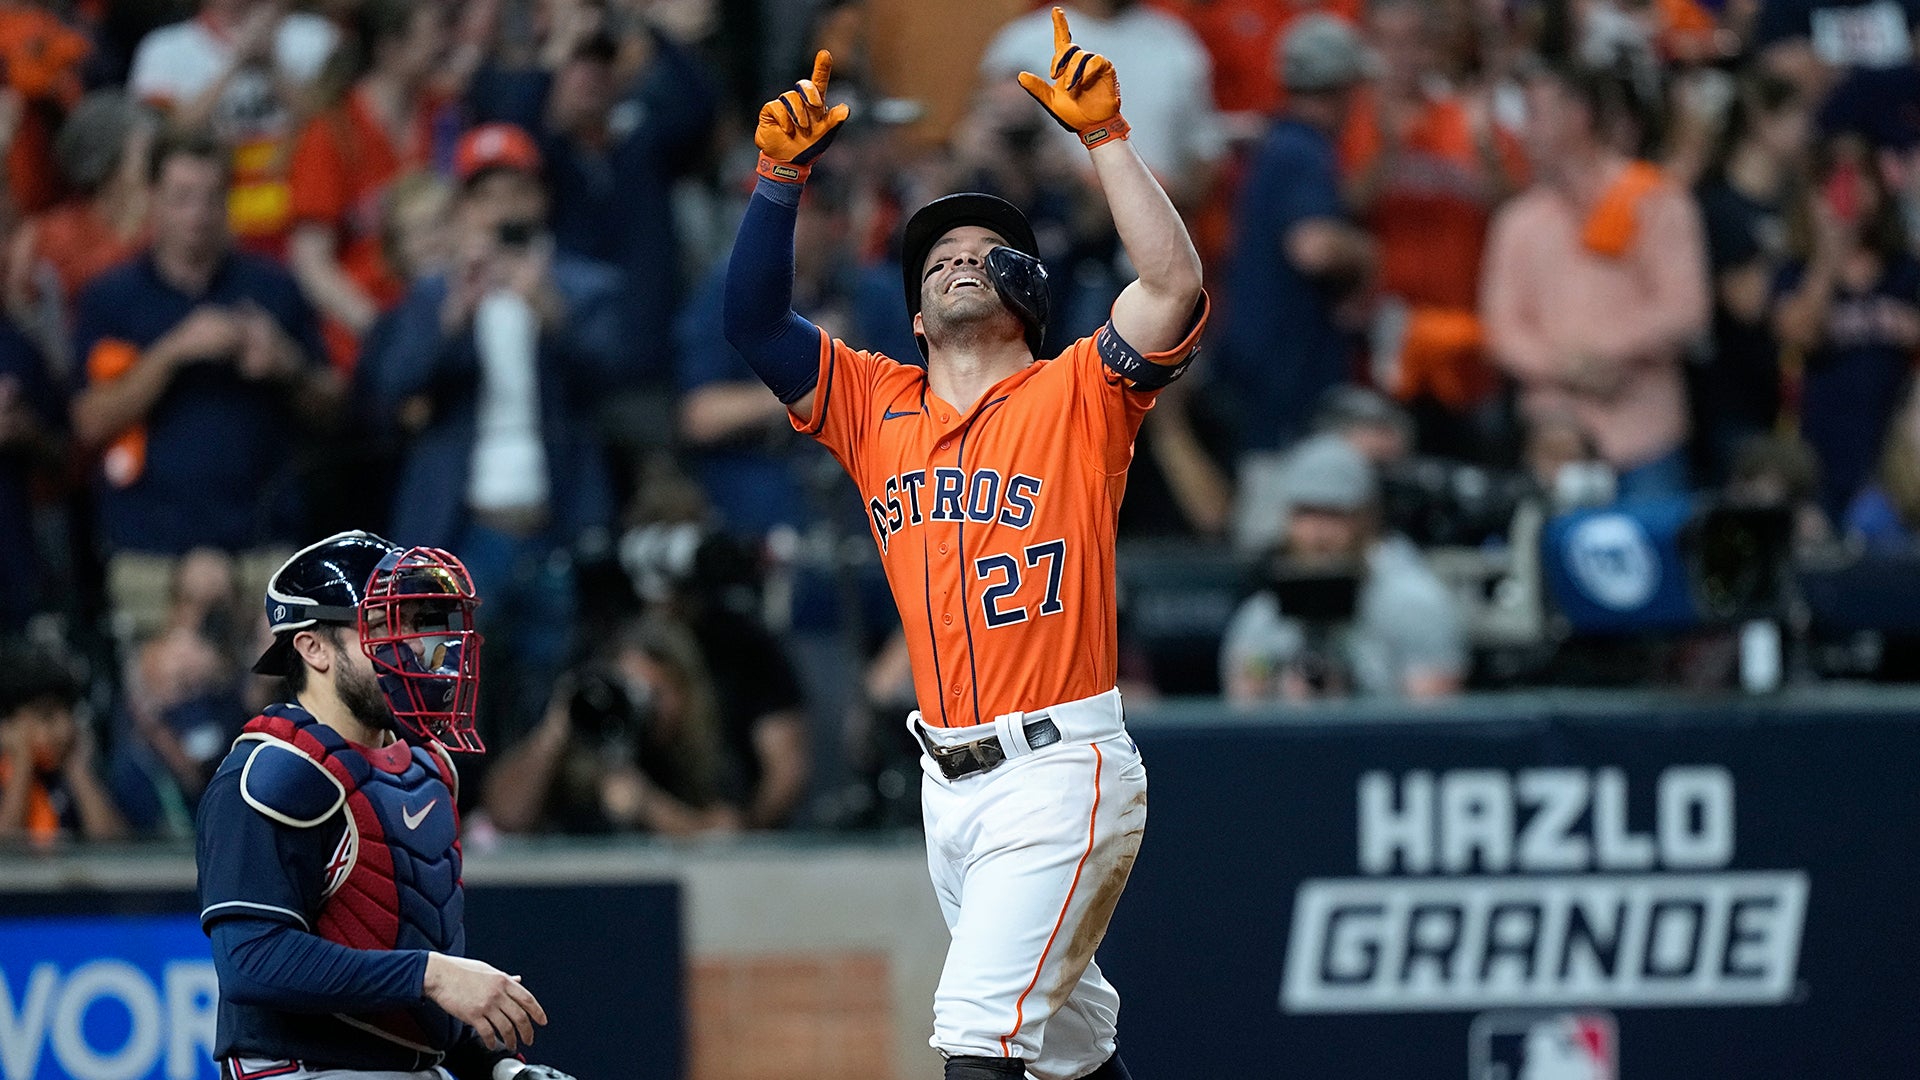 Faith-Filled Jose Altuve Steps Up Big to Lead Astros to World